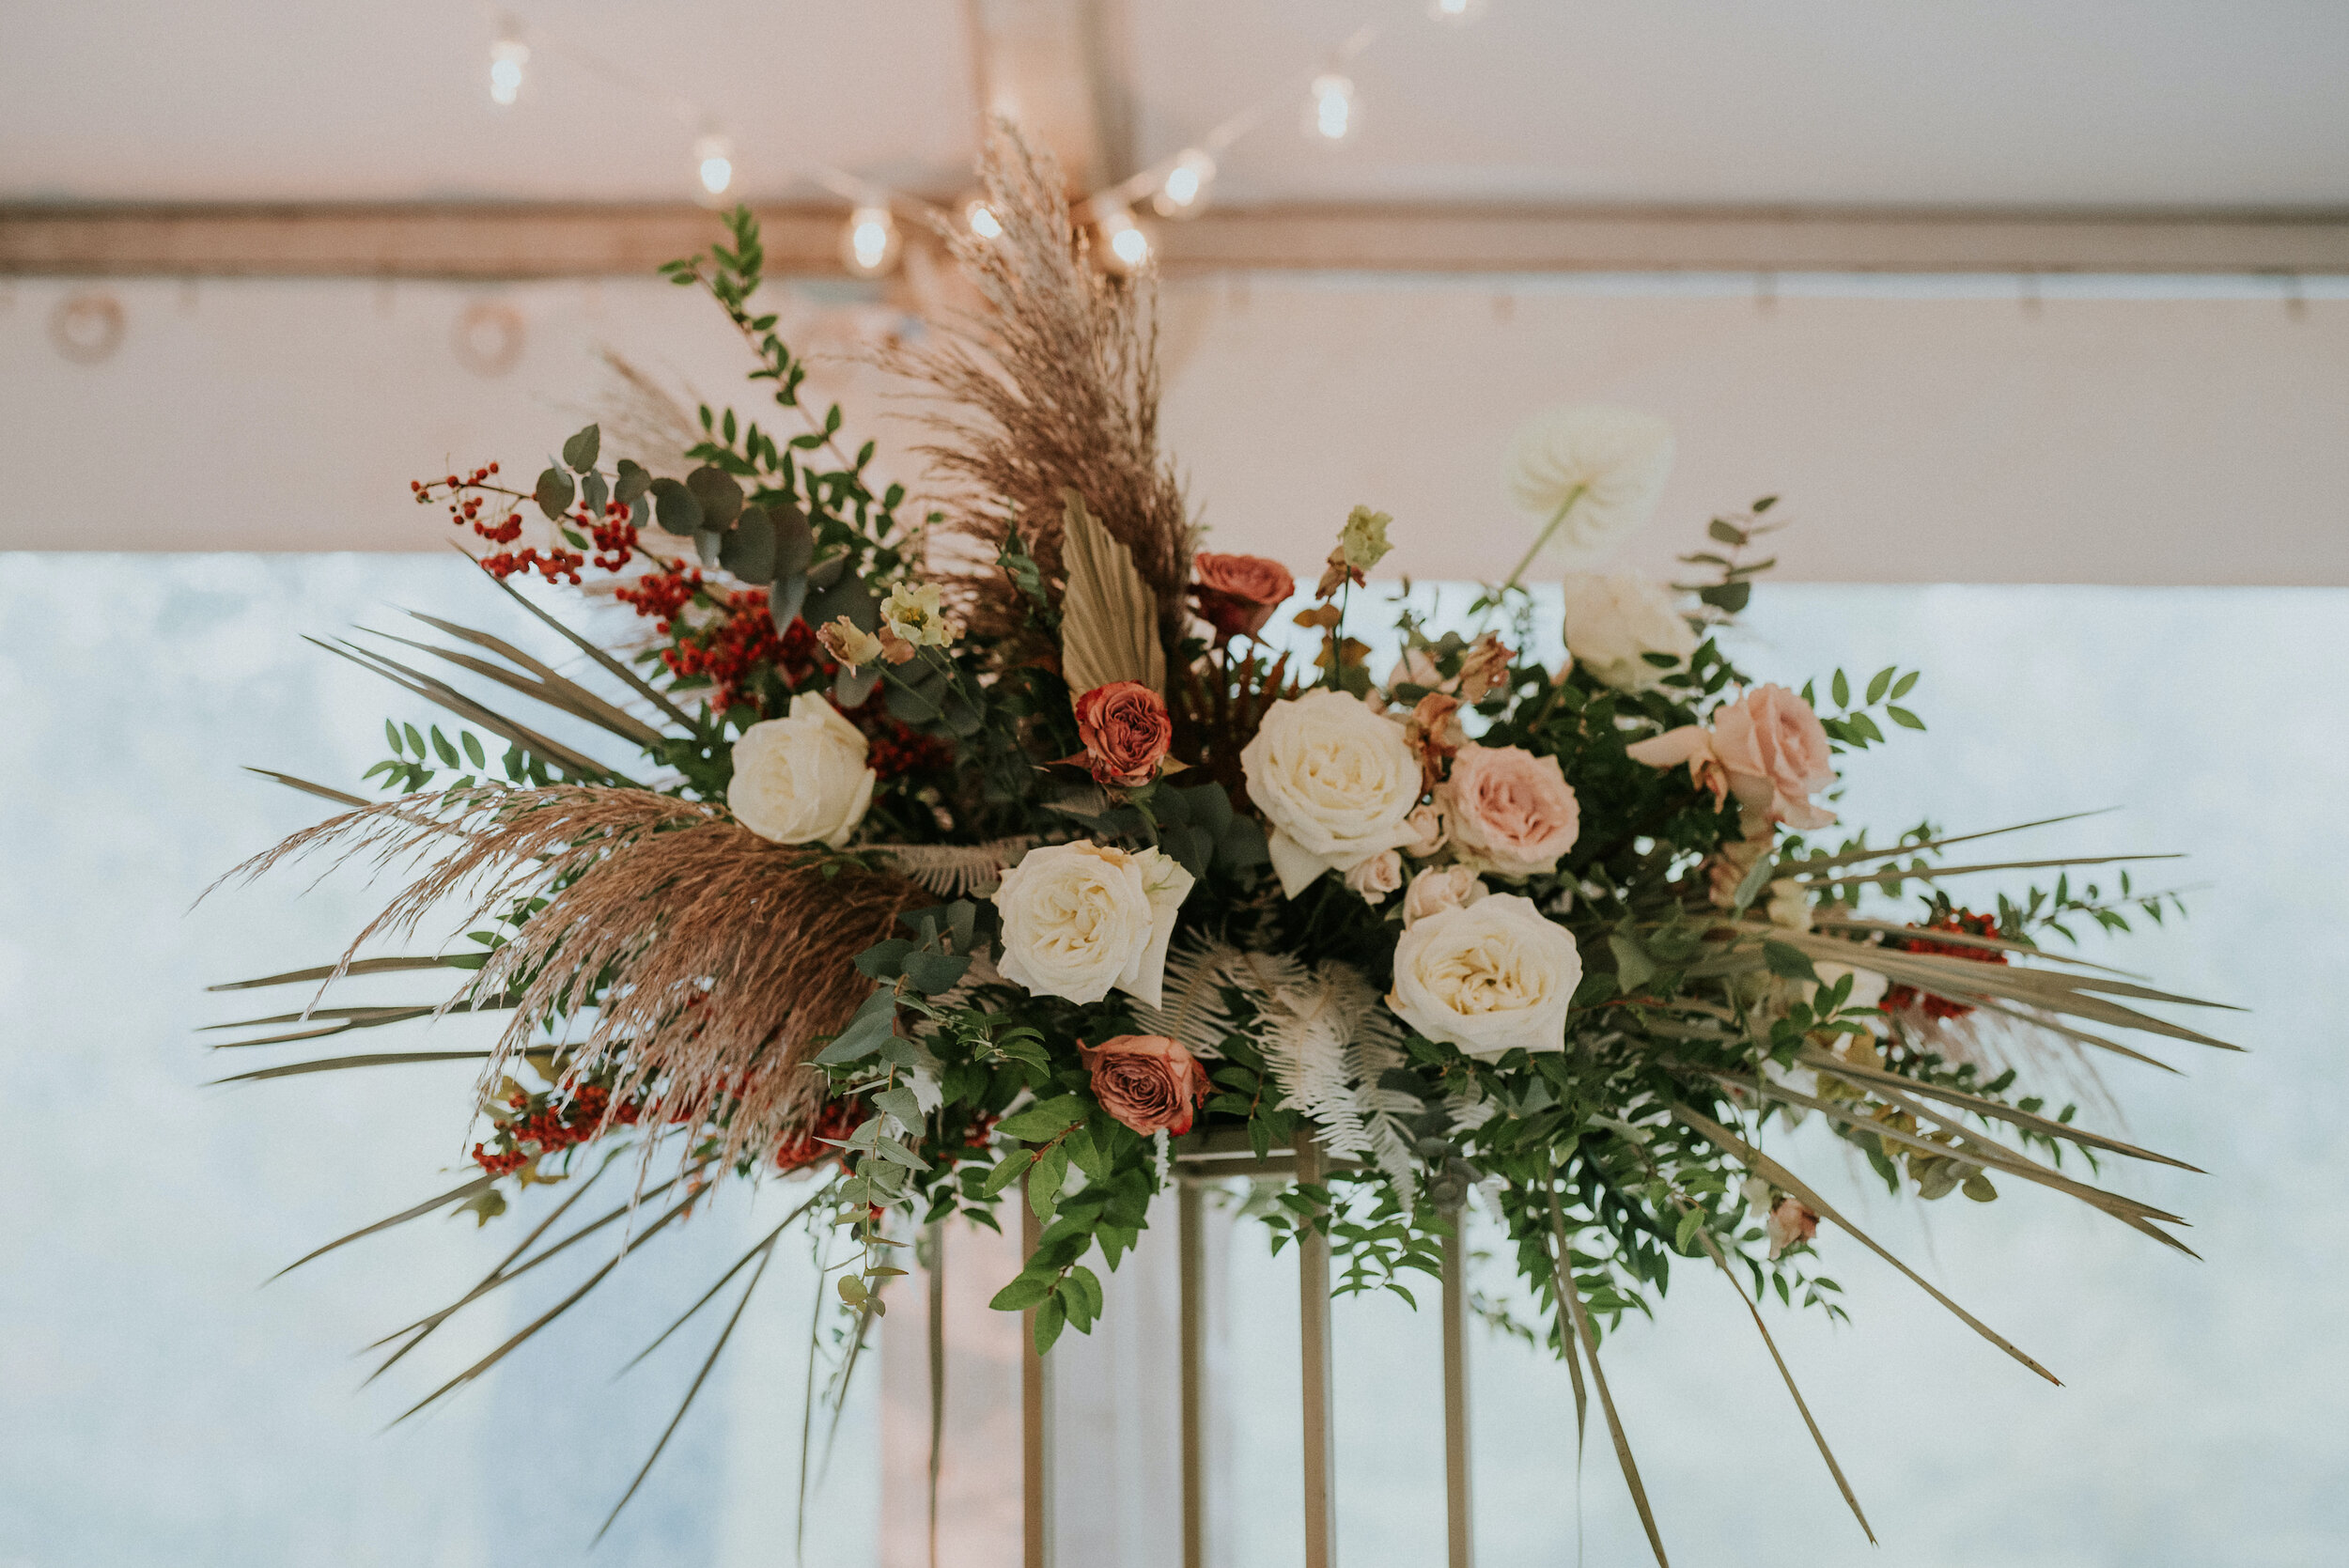 Bohemian and modern yet classically elegant. This wedding perfectly married boho elements of pampas grass, eucalyptus, and dried florals with topical stems of anthurium and orchid. Quicksand roses, cappuccino roses, ilex berry, and rust fern add a p…